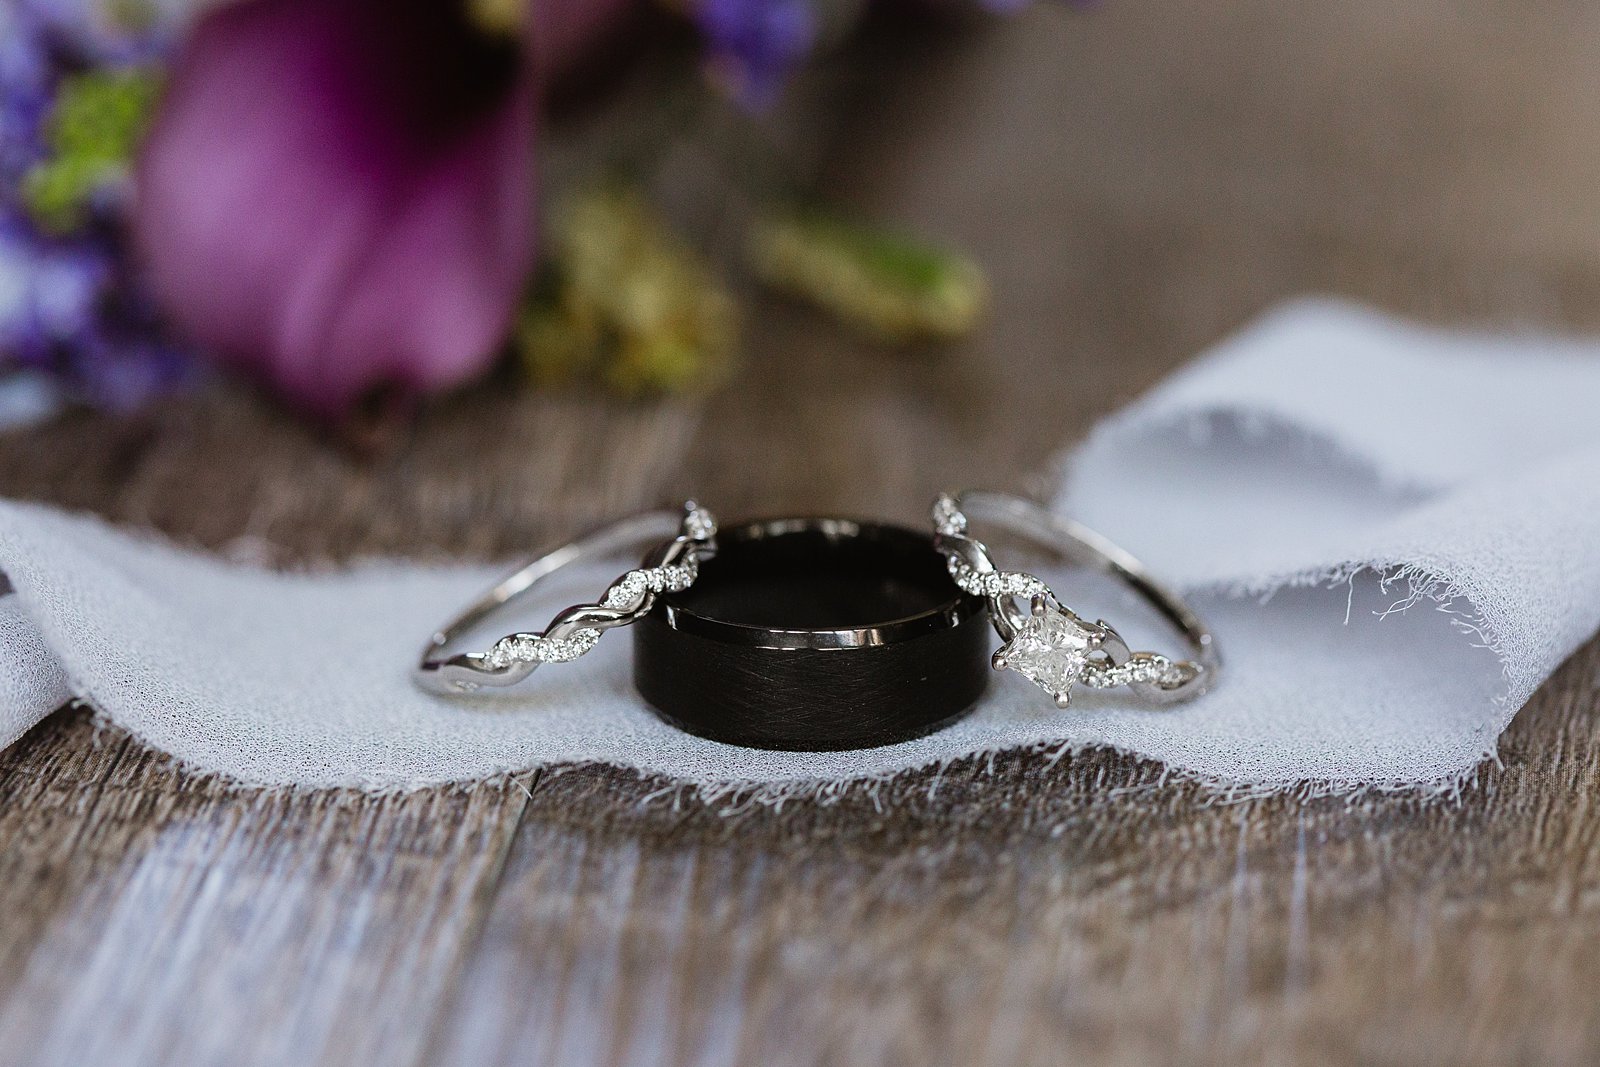 Bride and grooms simple white gold and black wedding bands by PMA Photography.